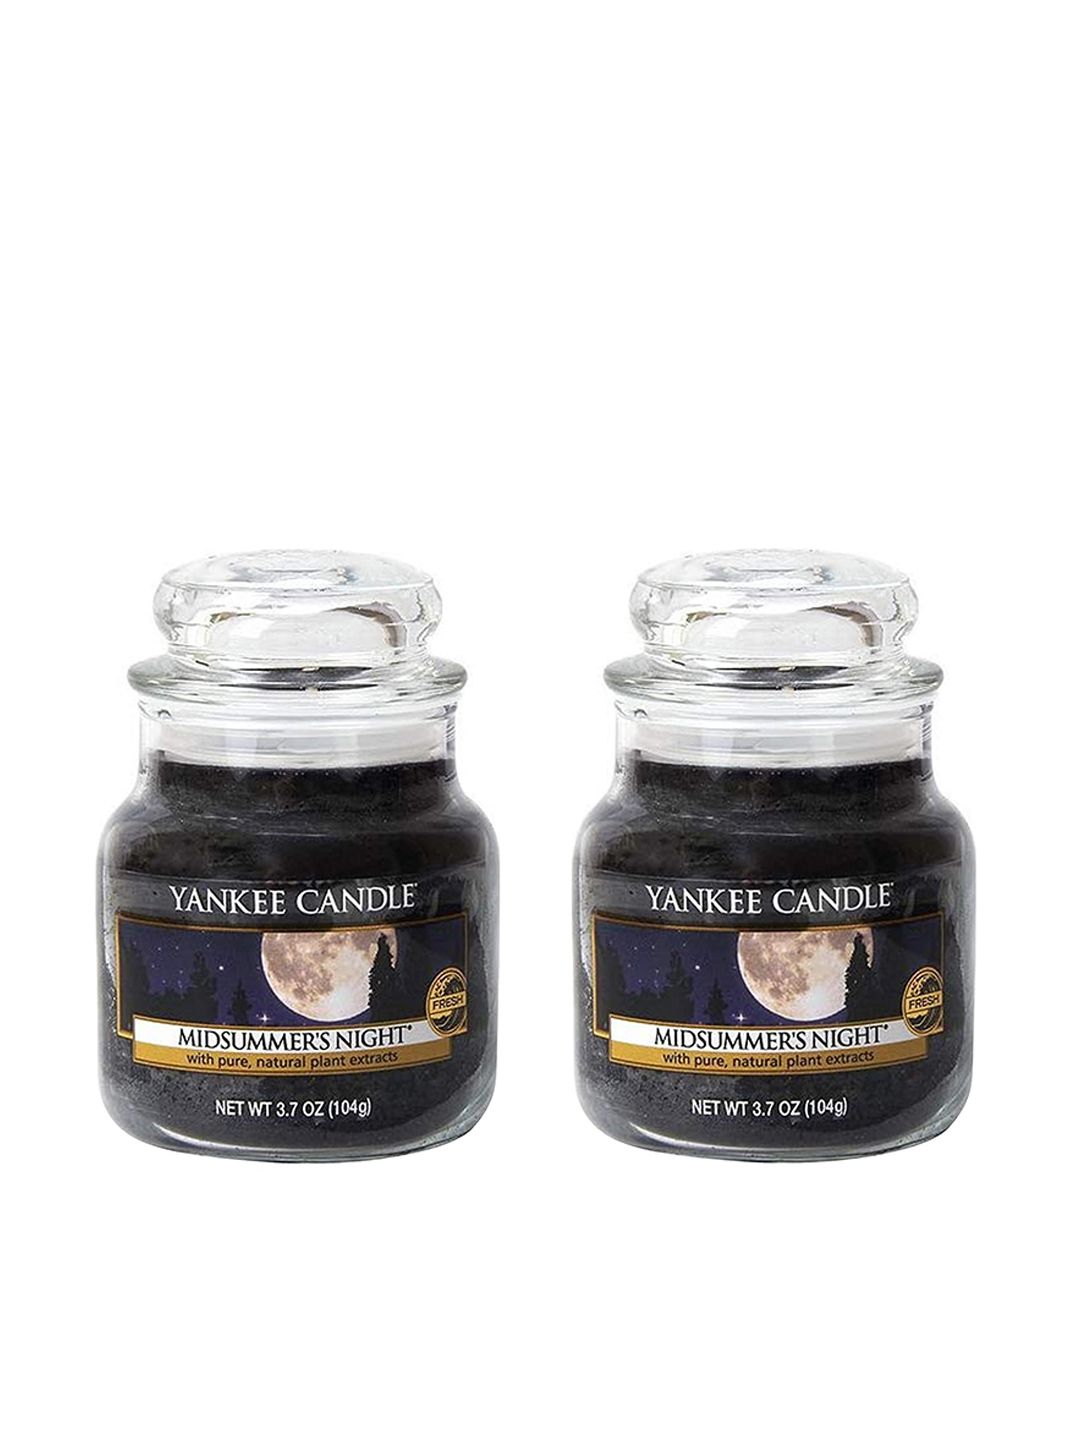 YANKEE CANDLE Set Of 2 Classic Jar Midsummer Night Scented Candles Price in India